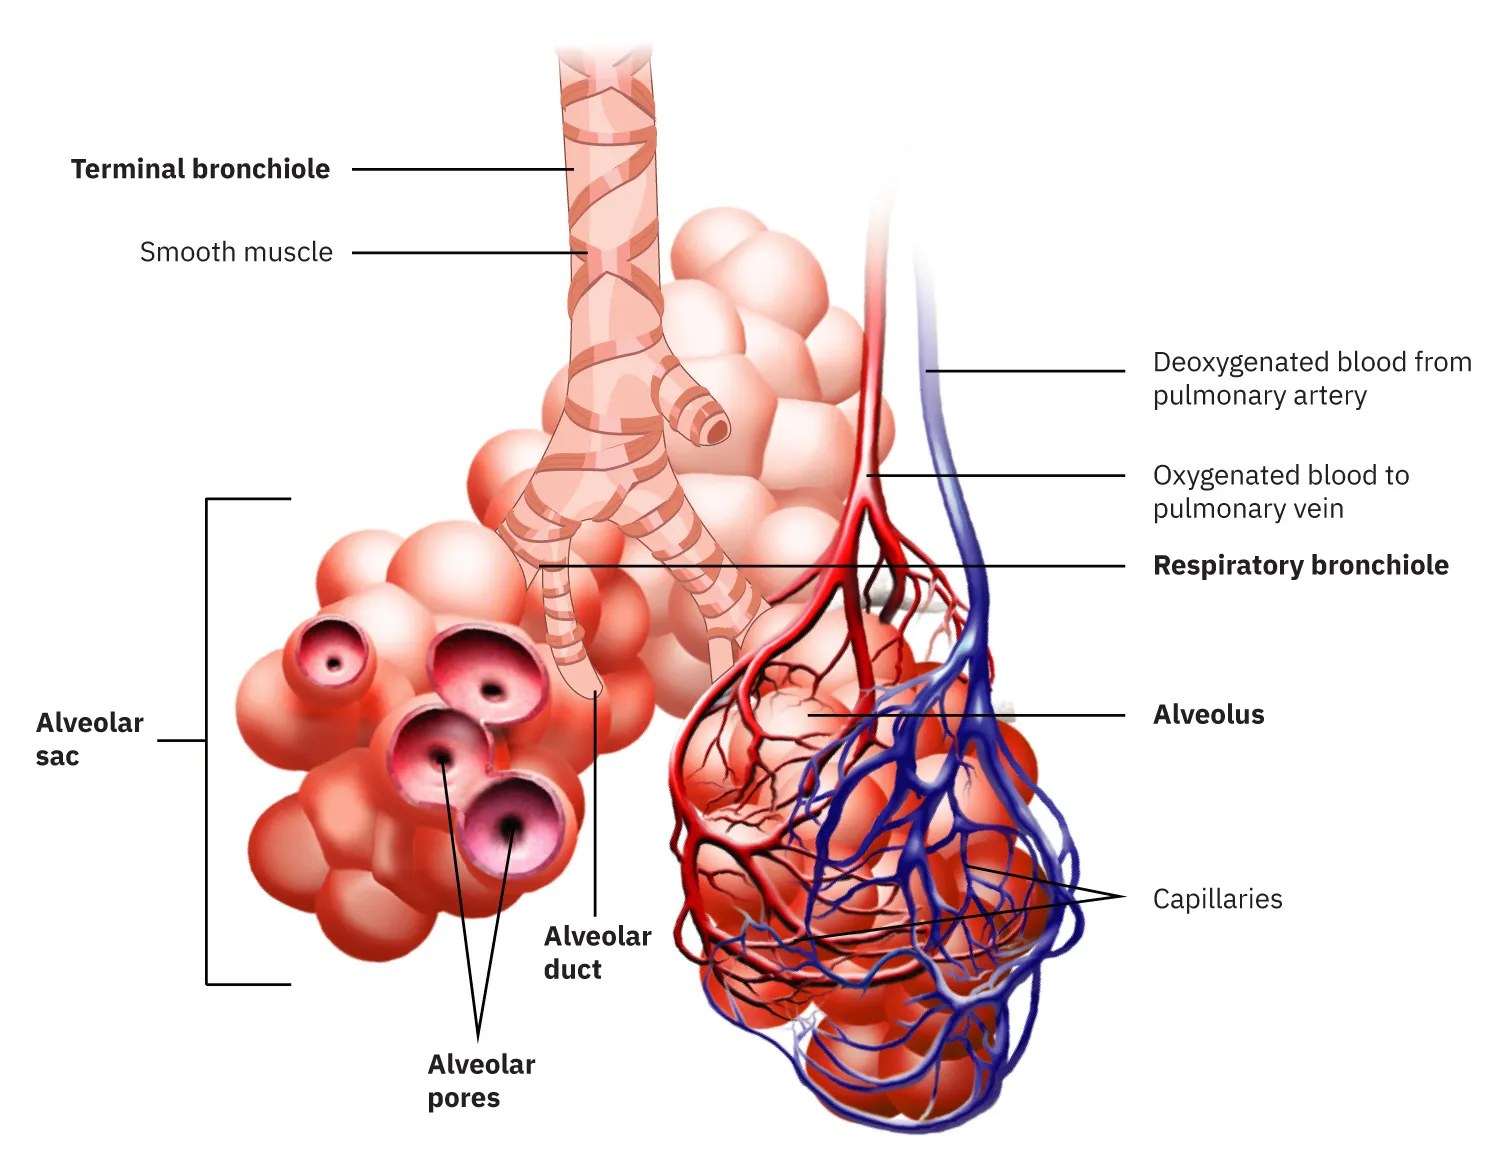 This image shows the bronchioles and alveolar sacs in the lungs and depicts the exchange of oxygenated and deoxygenated blood in the pulmonary blood vessels.